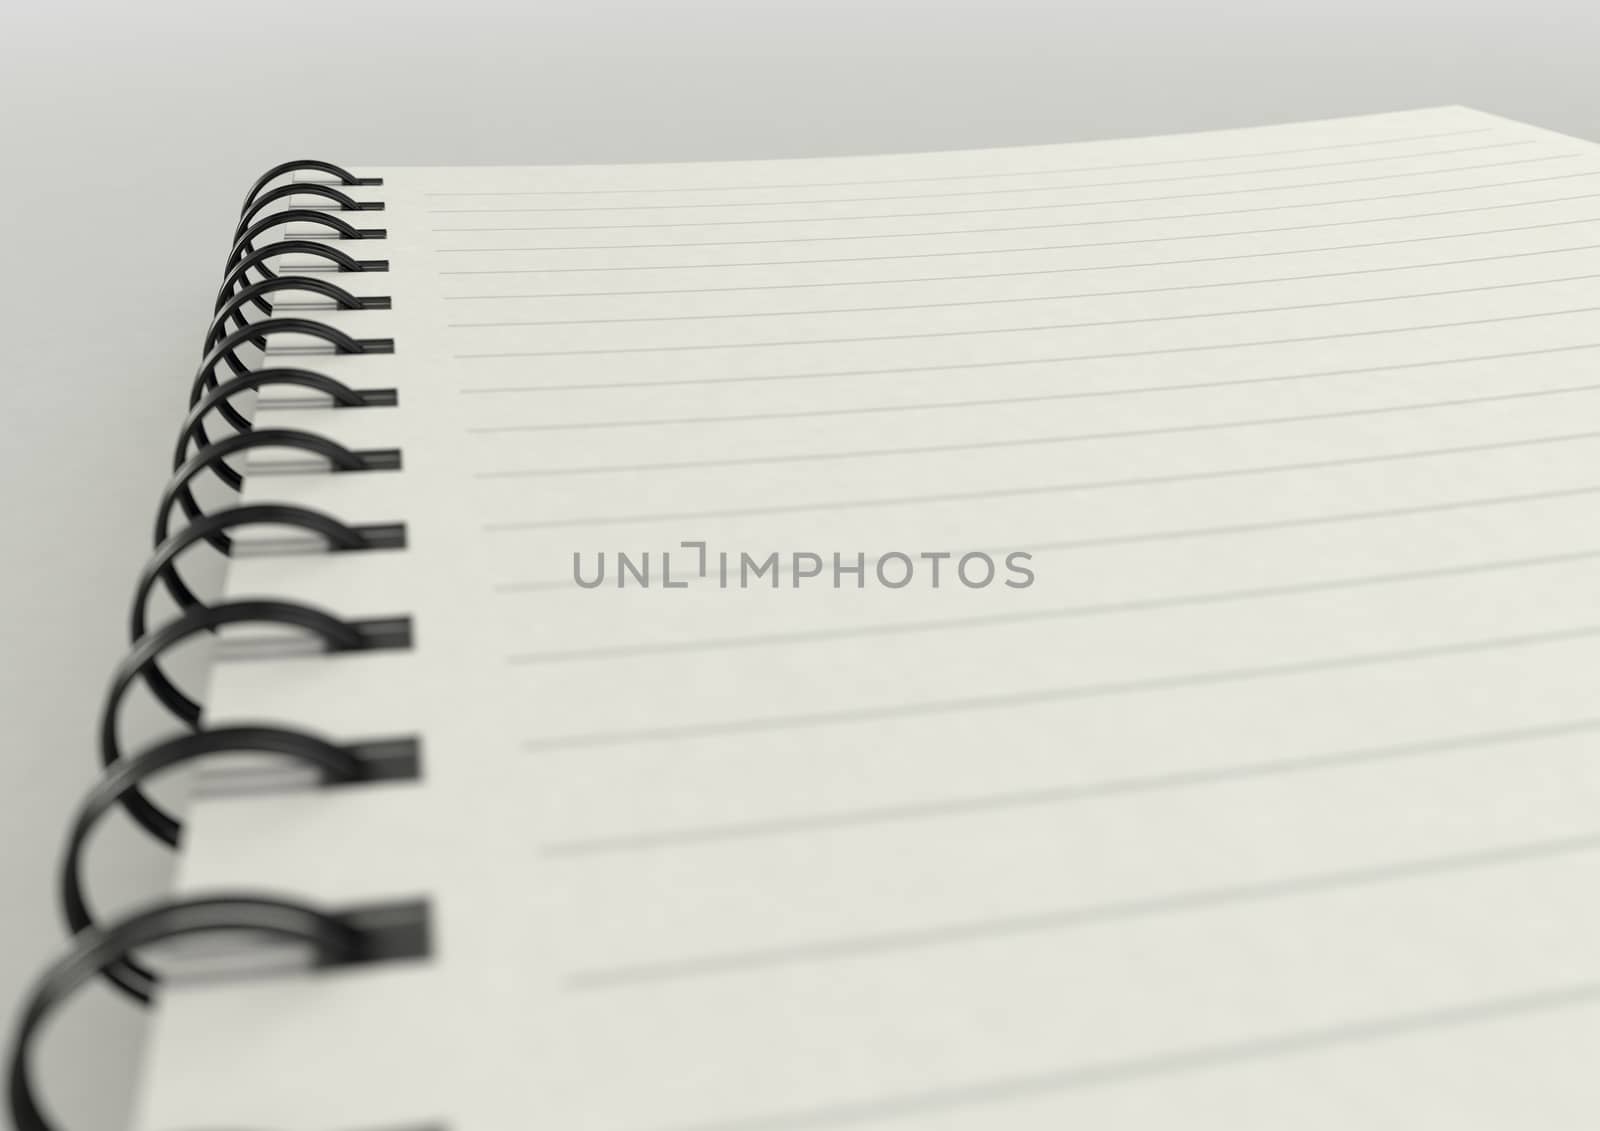 a  blank lined note pad on a plain surface close up